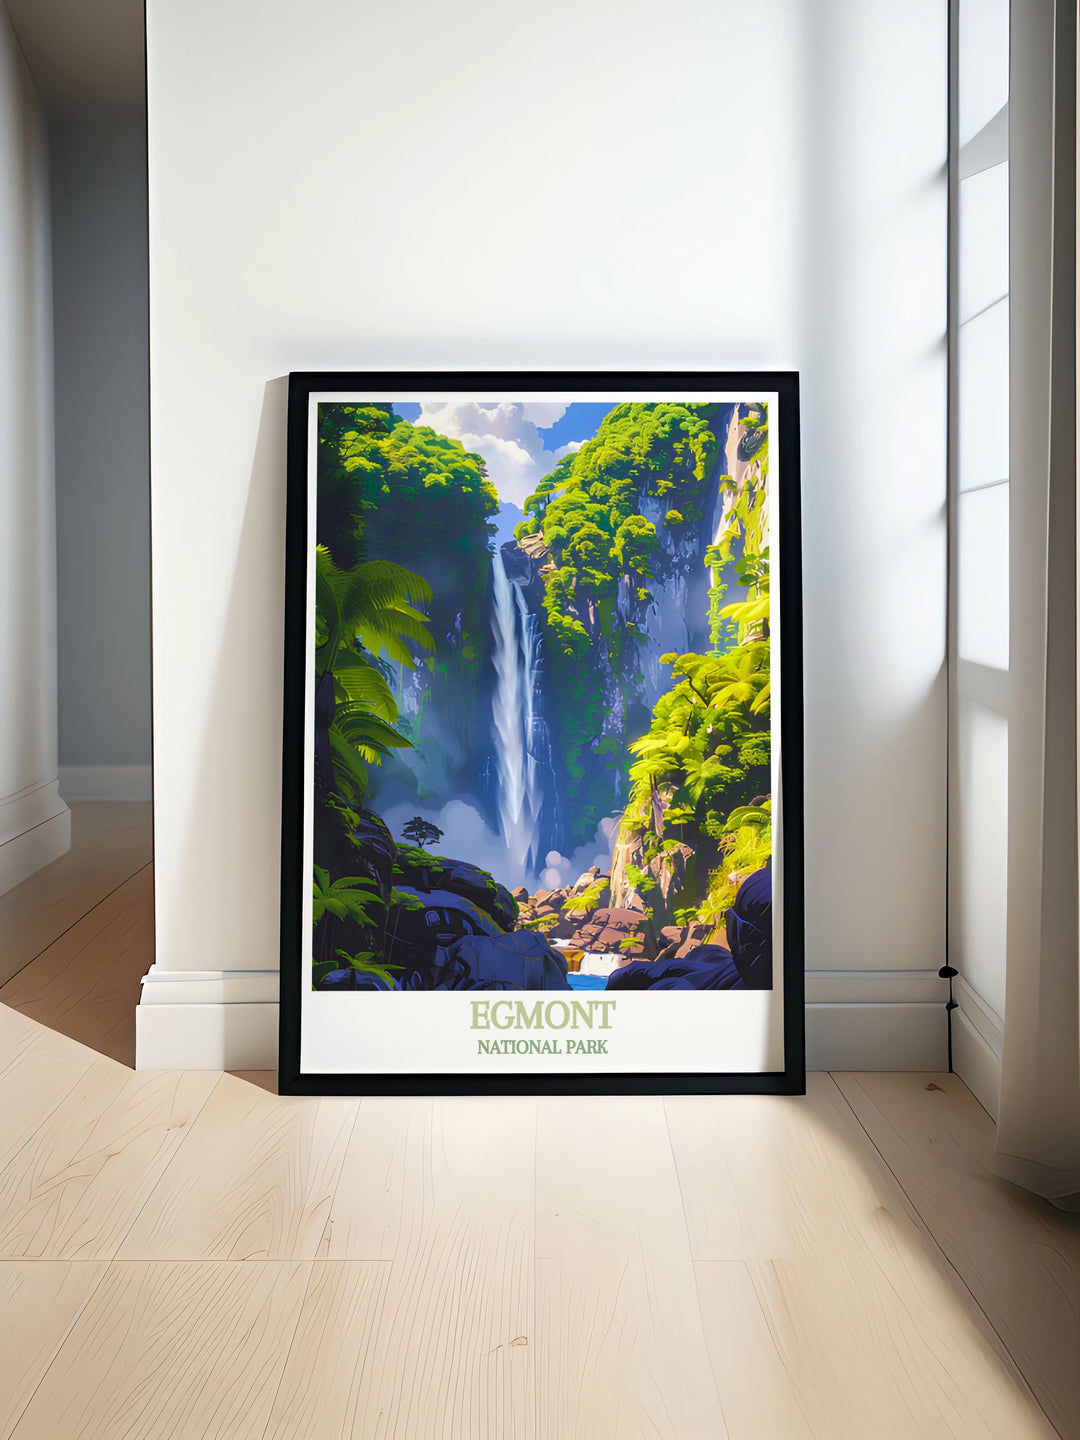 Gallery wall art showcasing the diverse landscapes of Egmont National Park, from lush forests to the iconic Mount Taranaki.